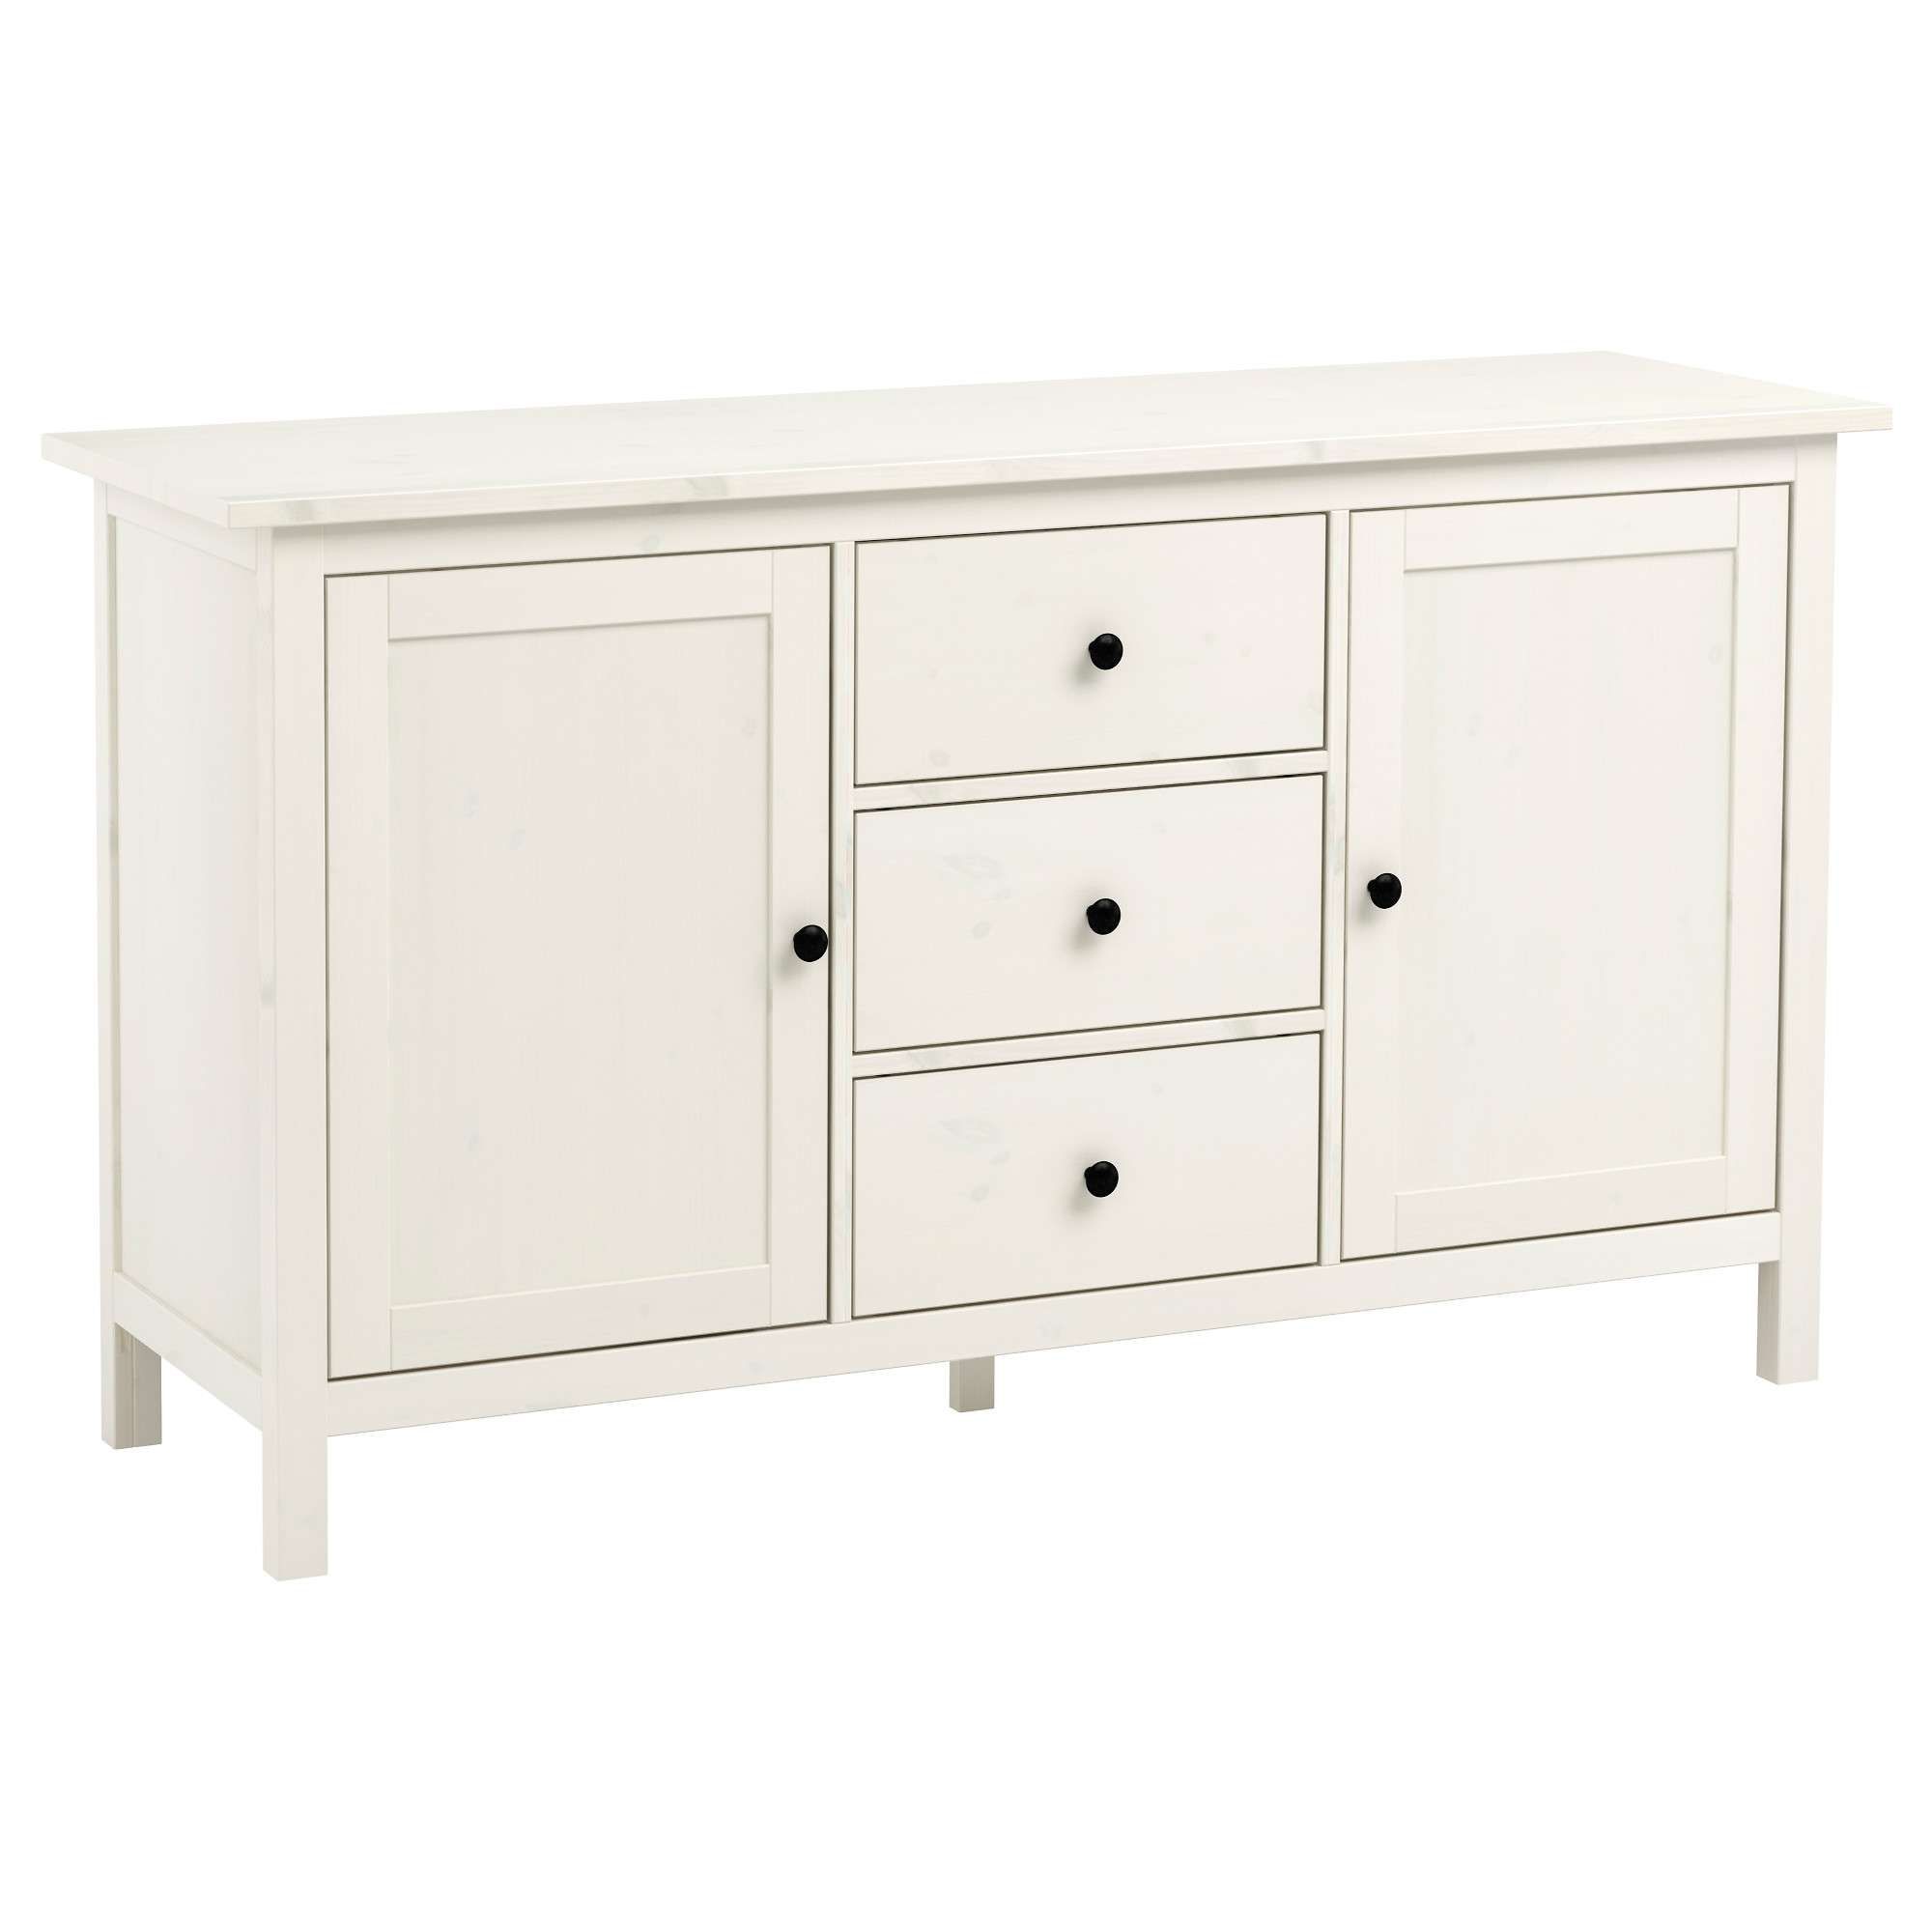 Hemnes Sideboard White Stain 157x88 Cm – Ikea For Whitewash Buffets Sideboards (View 18 of 20)